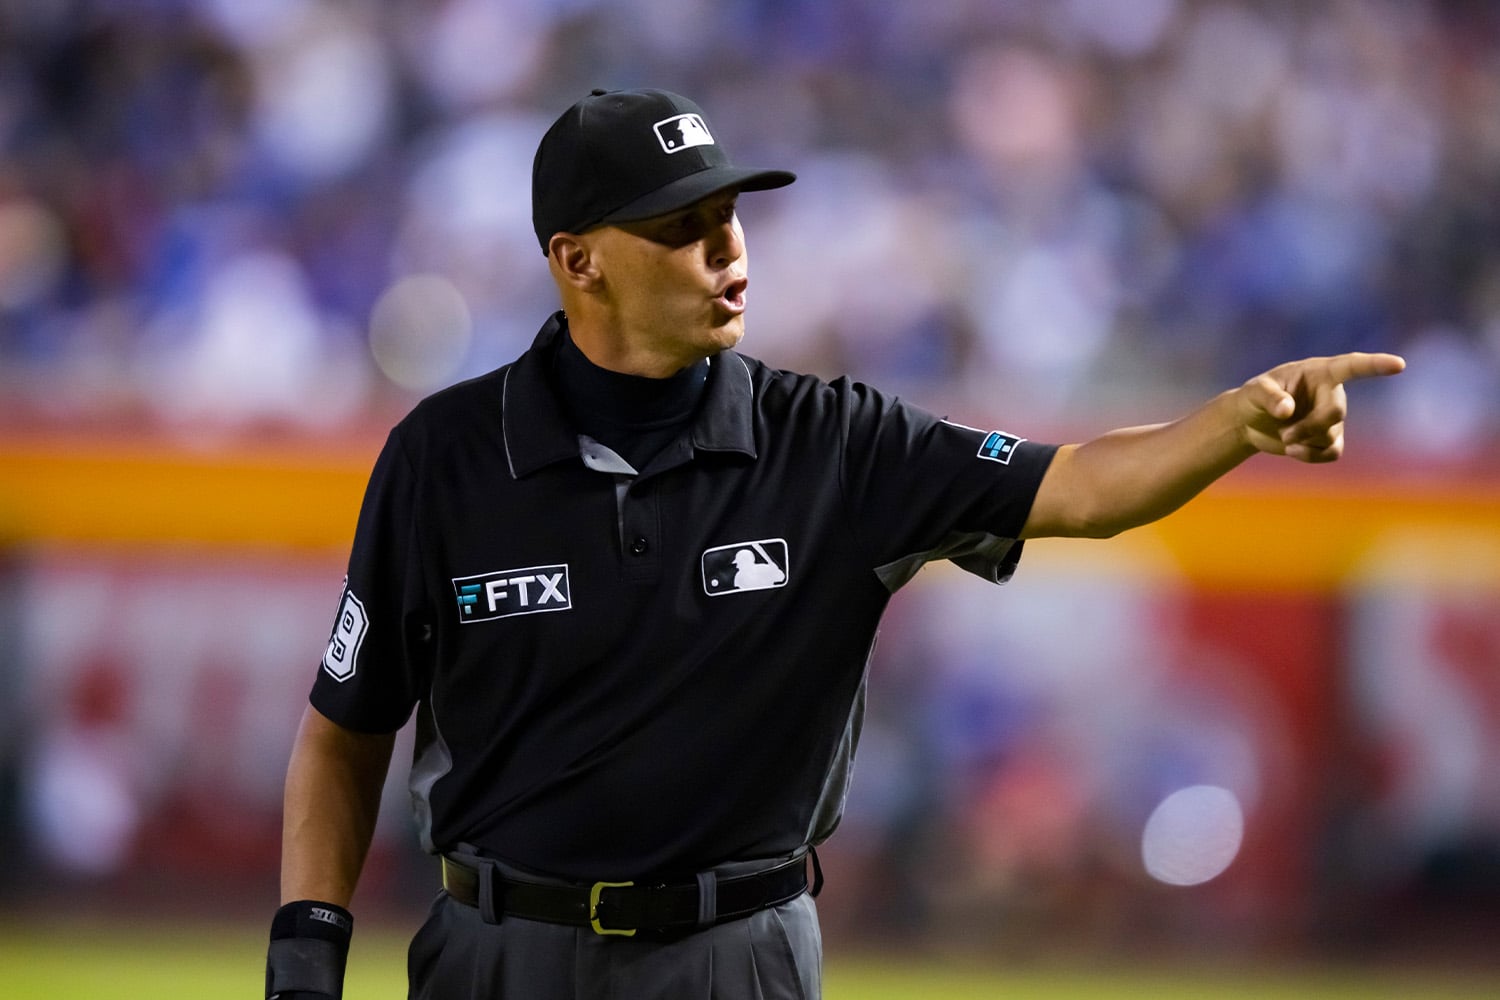 MLB umpire with FTX logo advertisement on his shirt points towards the dug out